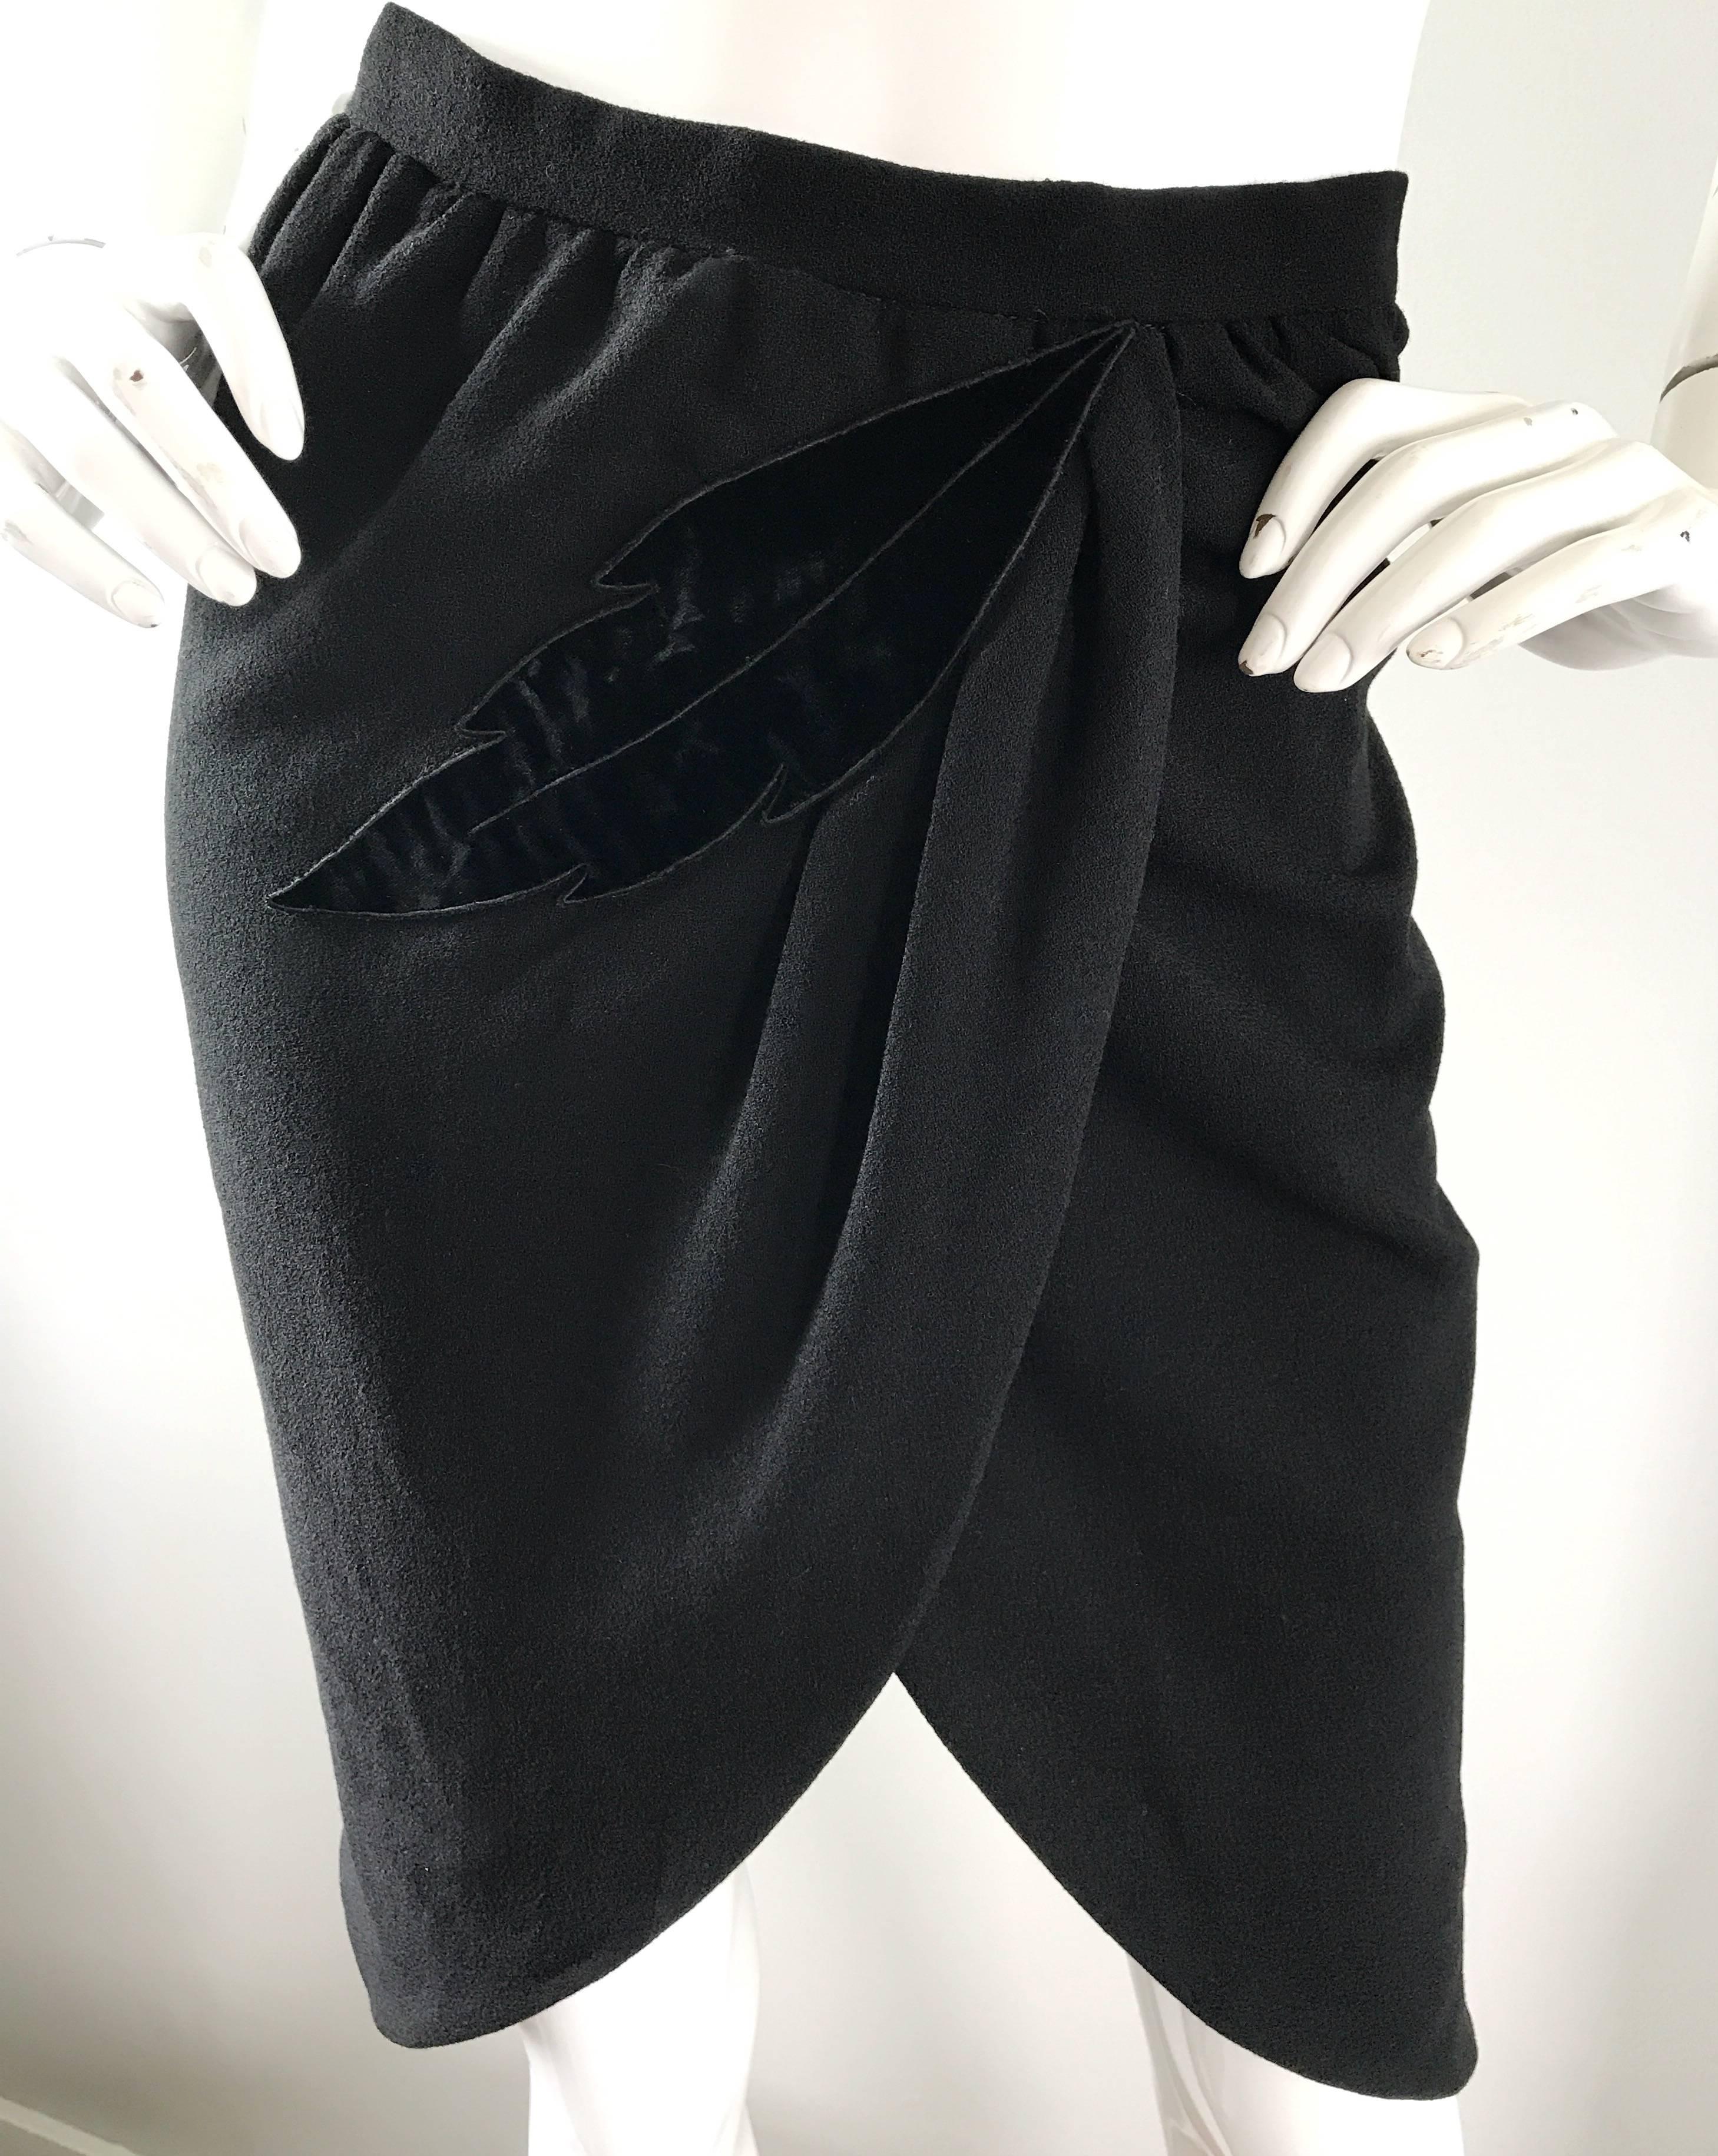 Not just your basic black skirt! This 1990s / 90s black virgin wool vintage VALENTINO high waisted pencil skirt features a black velvet leaf motif appliqué on the front. Flattering draped detail, with a tulip hem. Hidden metal zipper up the side